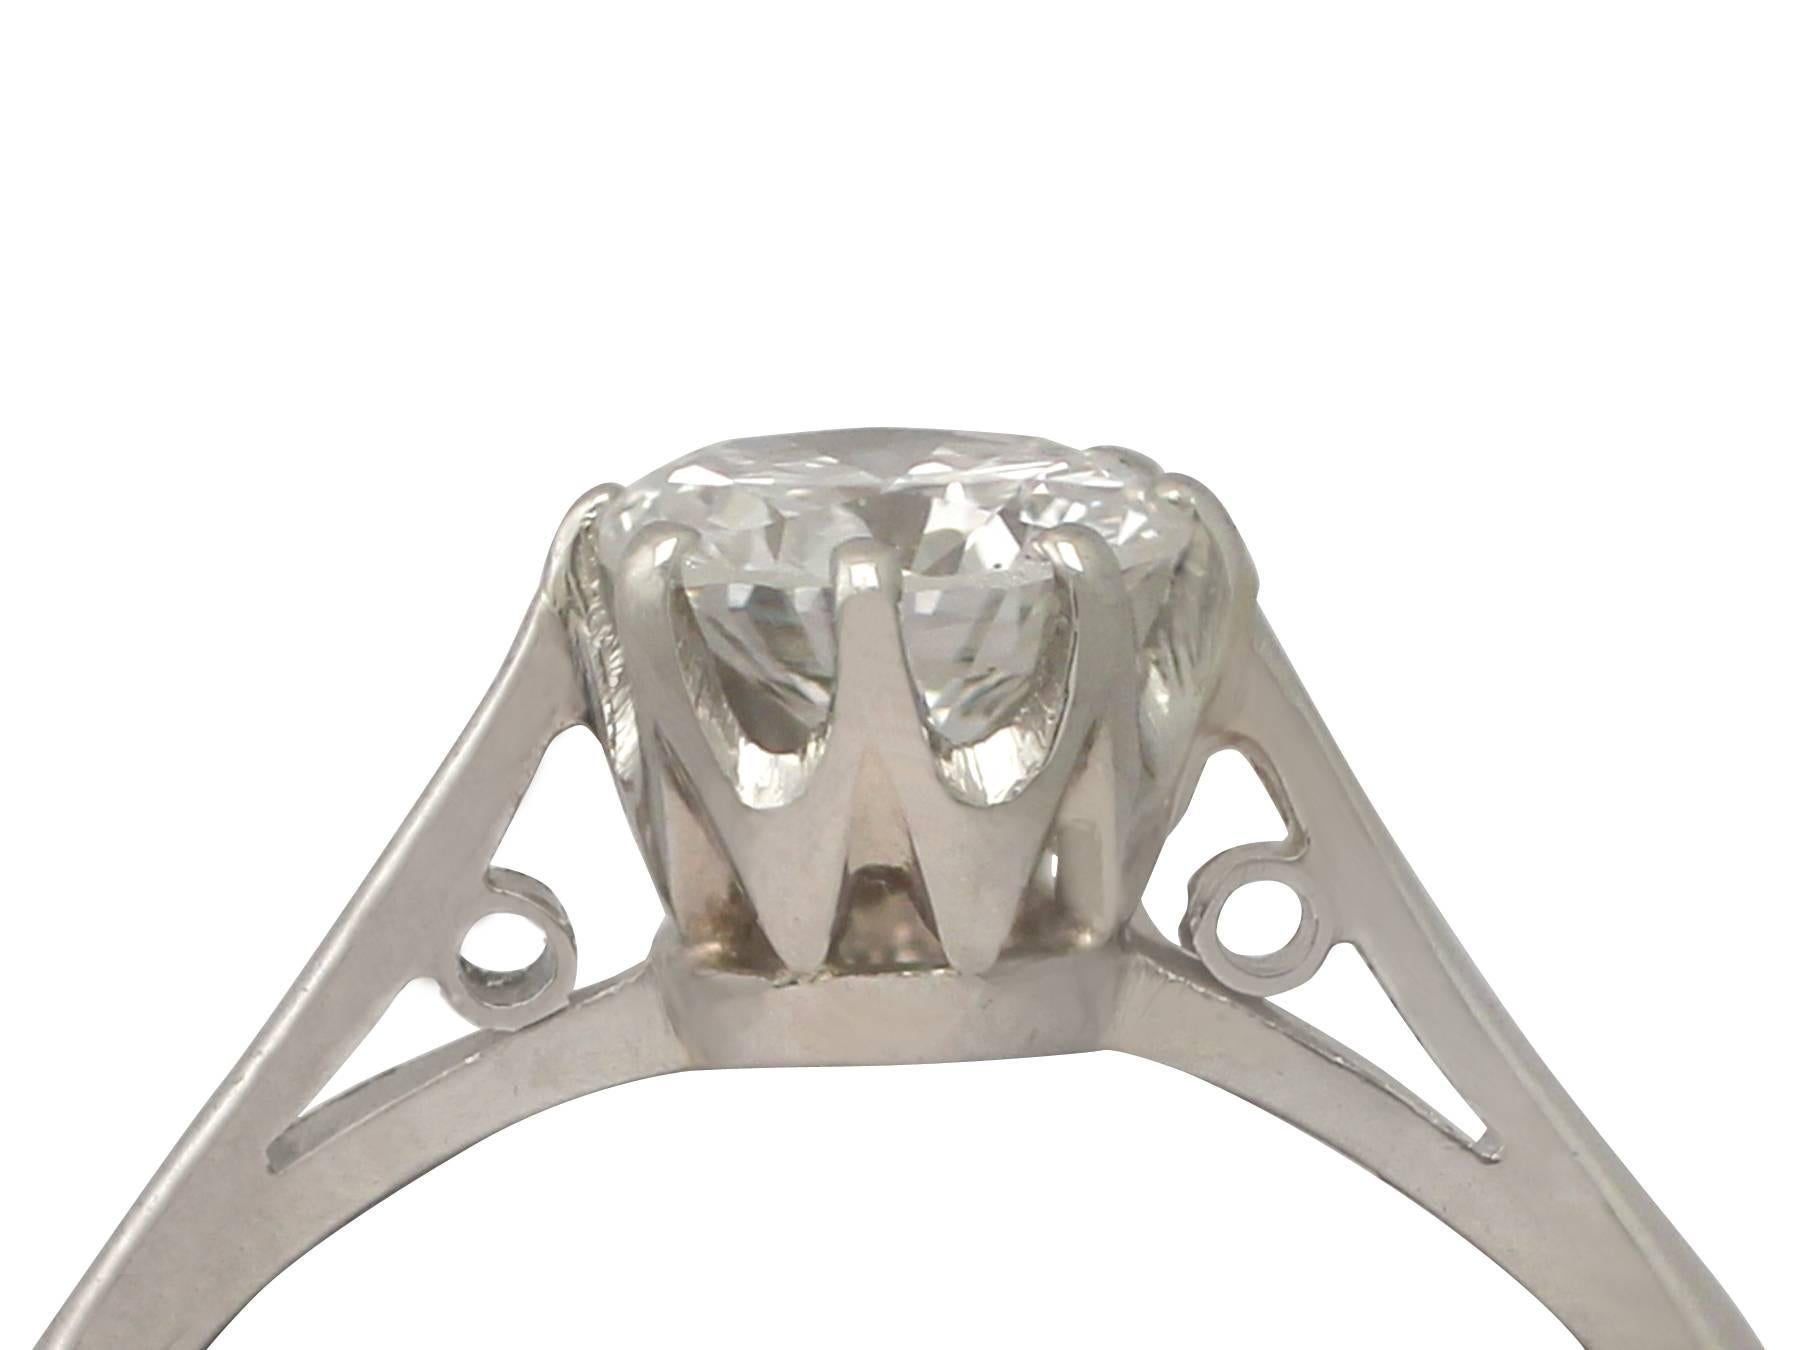 A fine and impressive vintage 0.70 Carat diamond and platinum solitaire ring; part of our diverse vintage jewelry and estate jewelry collections

This fine and impressive vintage diamond engagement ring has been crafted in platinum.

The pierced